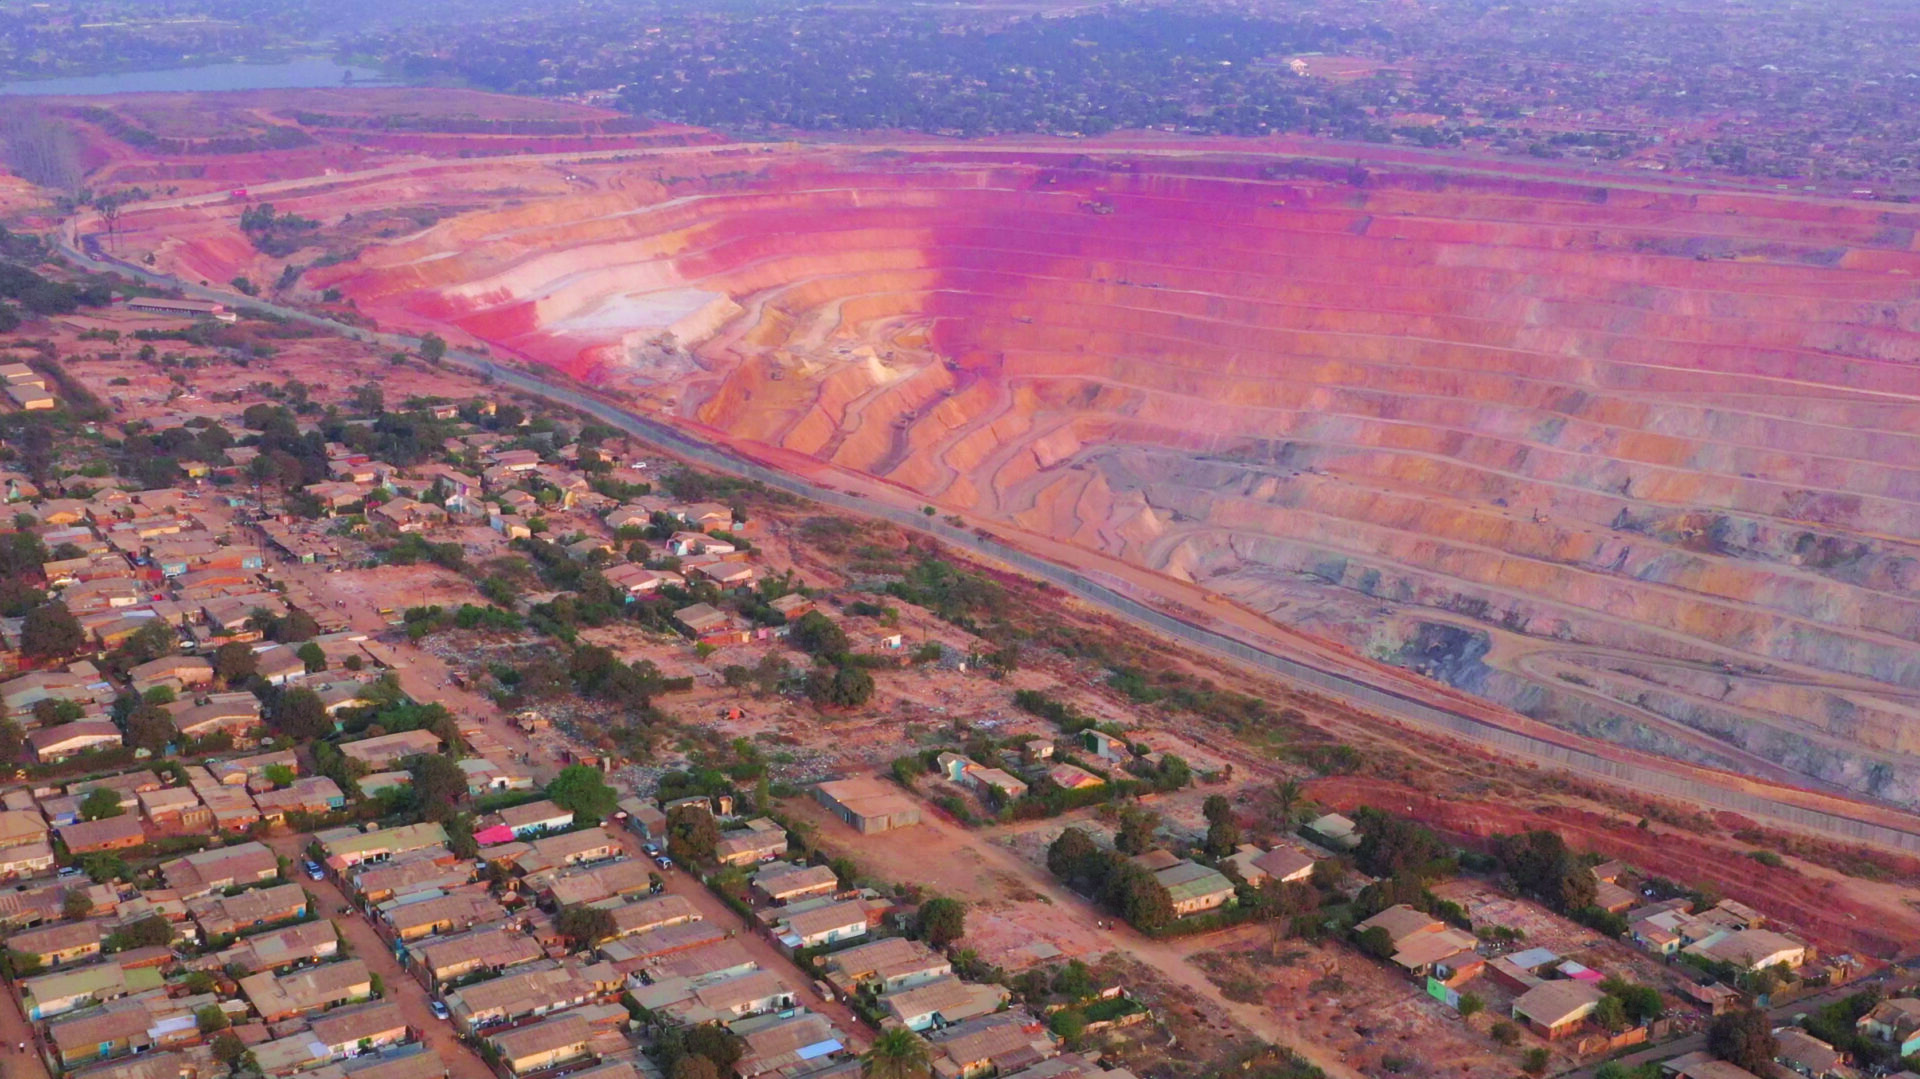 Drone photograph of the neighborhood of Gécamines Kolwezi, on the edge of the Kolwezi copper and cobalt mine operated by Chinese-owned company COMMUS, DRC, September 2022.